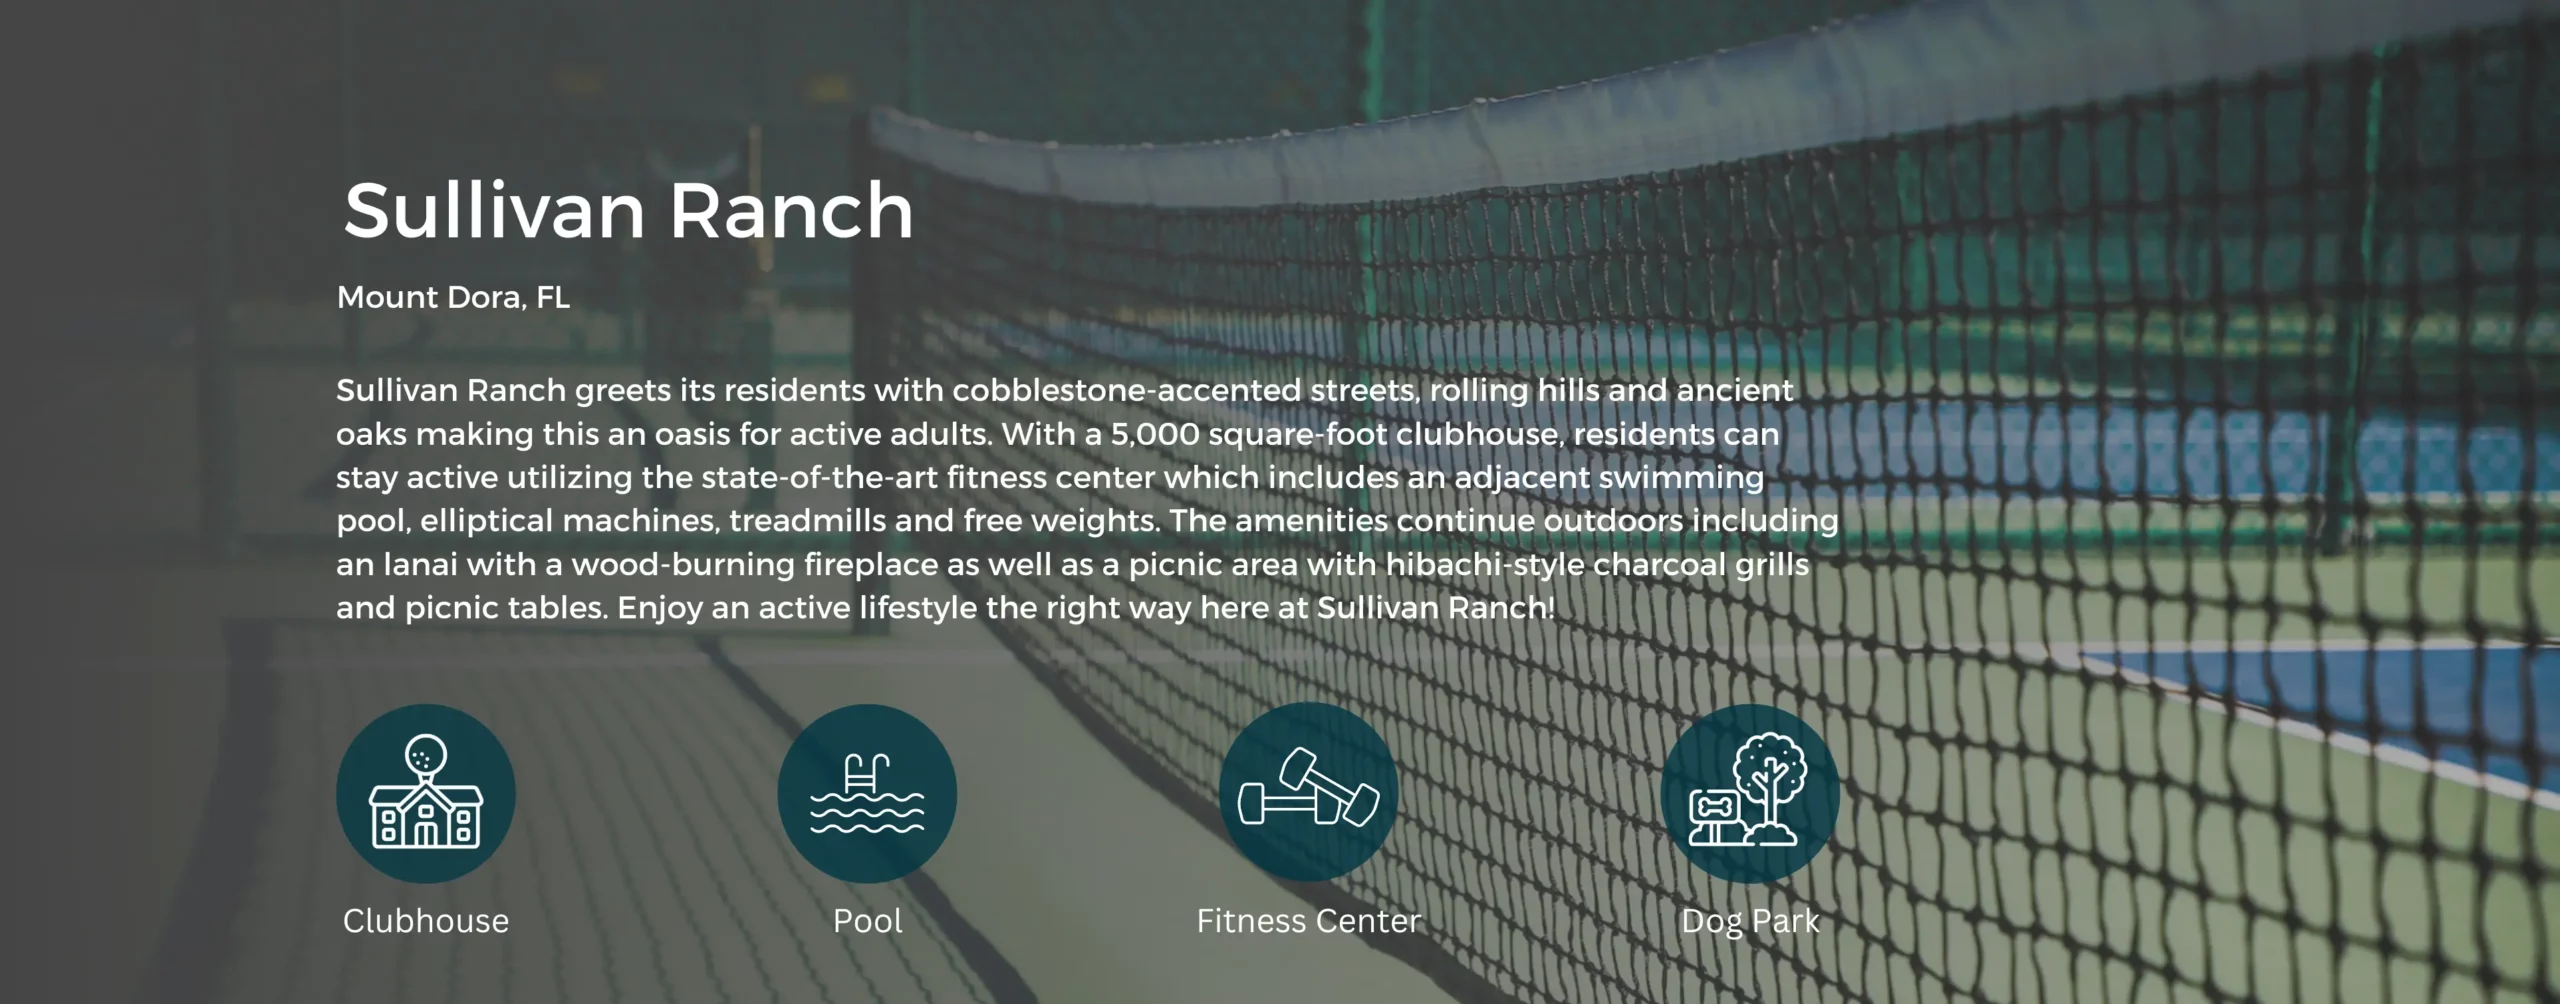 Icons showing Clubhouse, Pool. Fitness Center, and Dog Park. Background image is a tennis court.